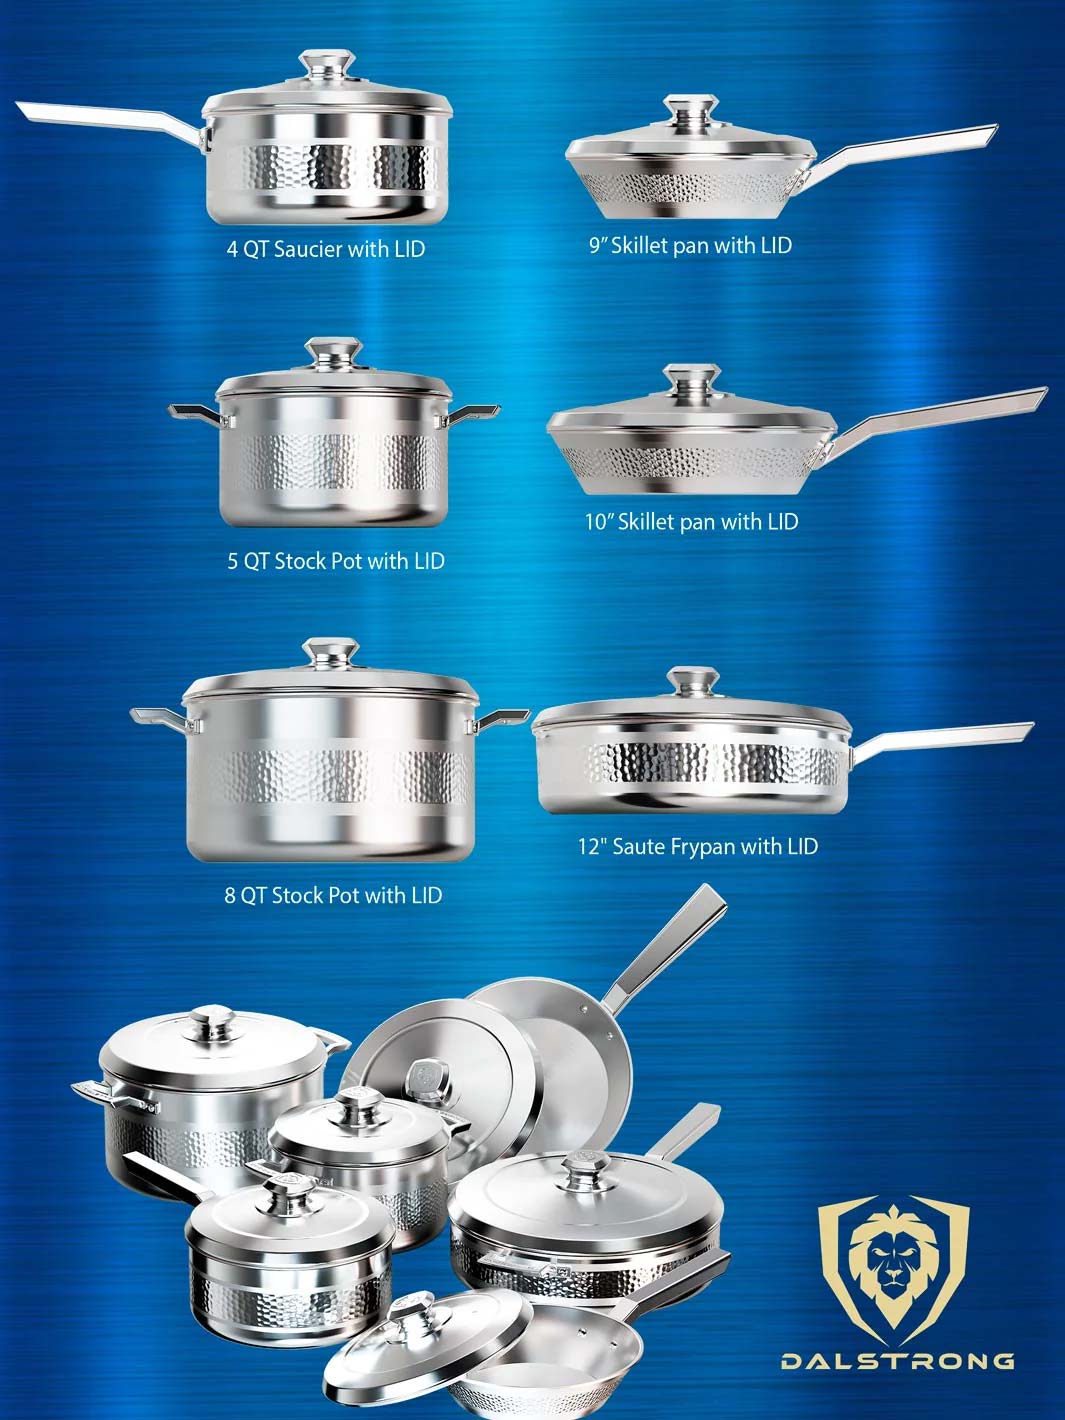 Dalstrong avalon series 12 piece cookware set silver featuring it's complete set of cookware.